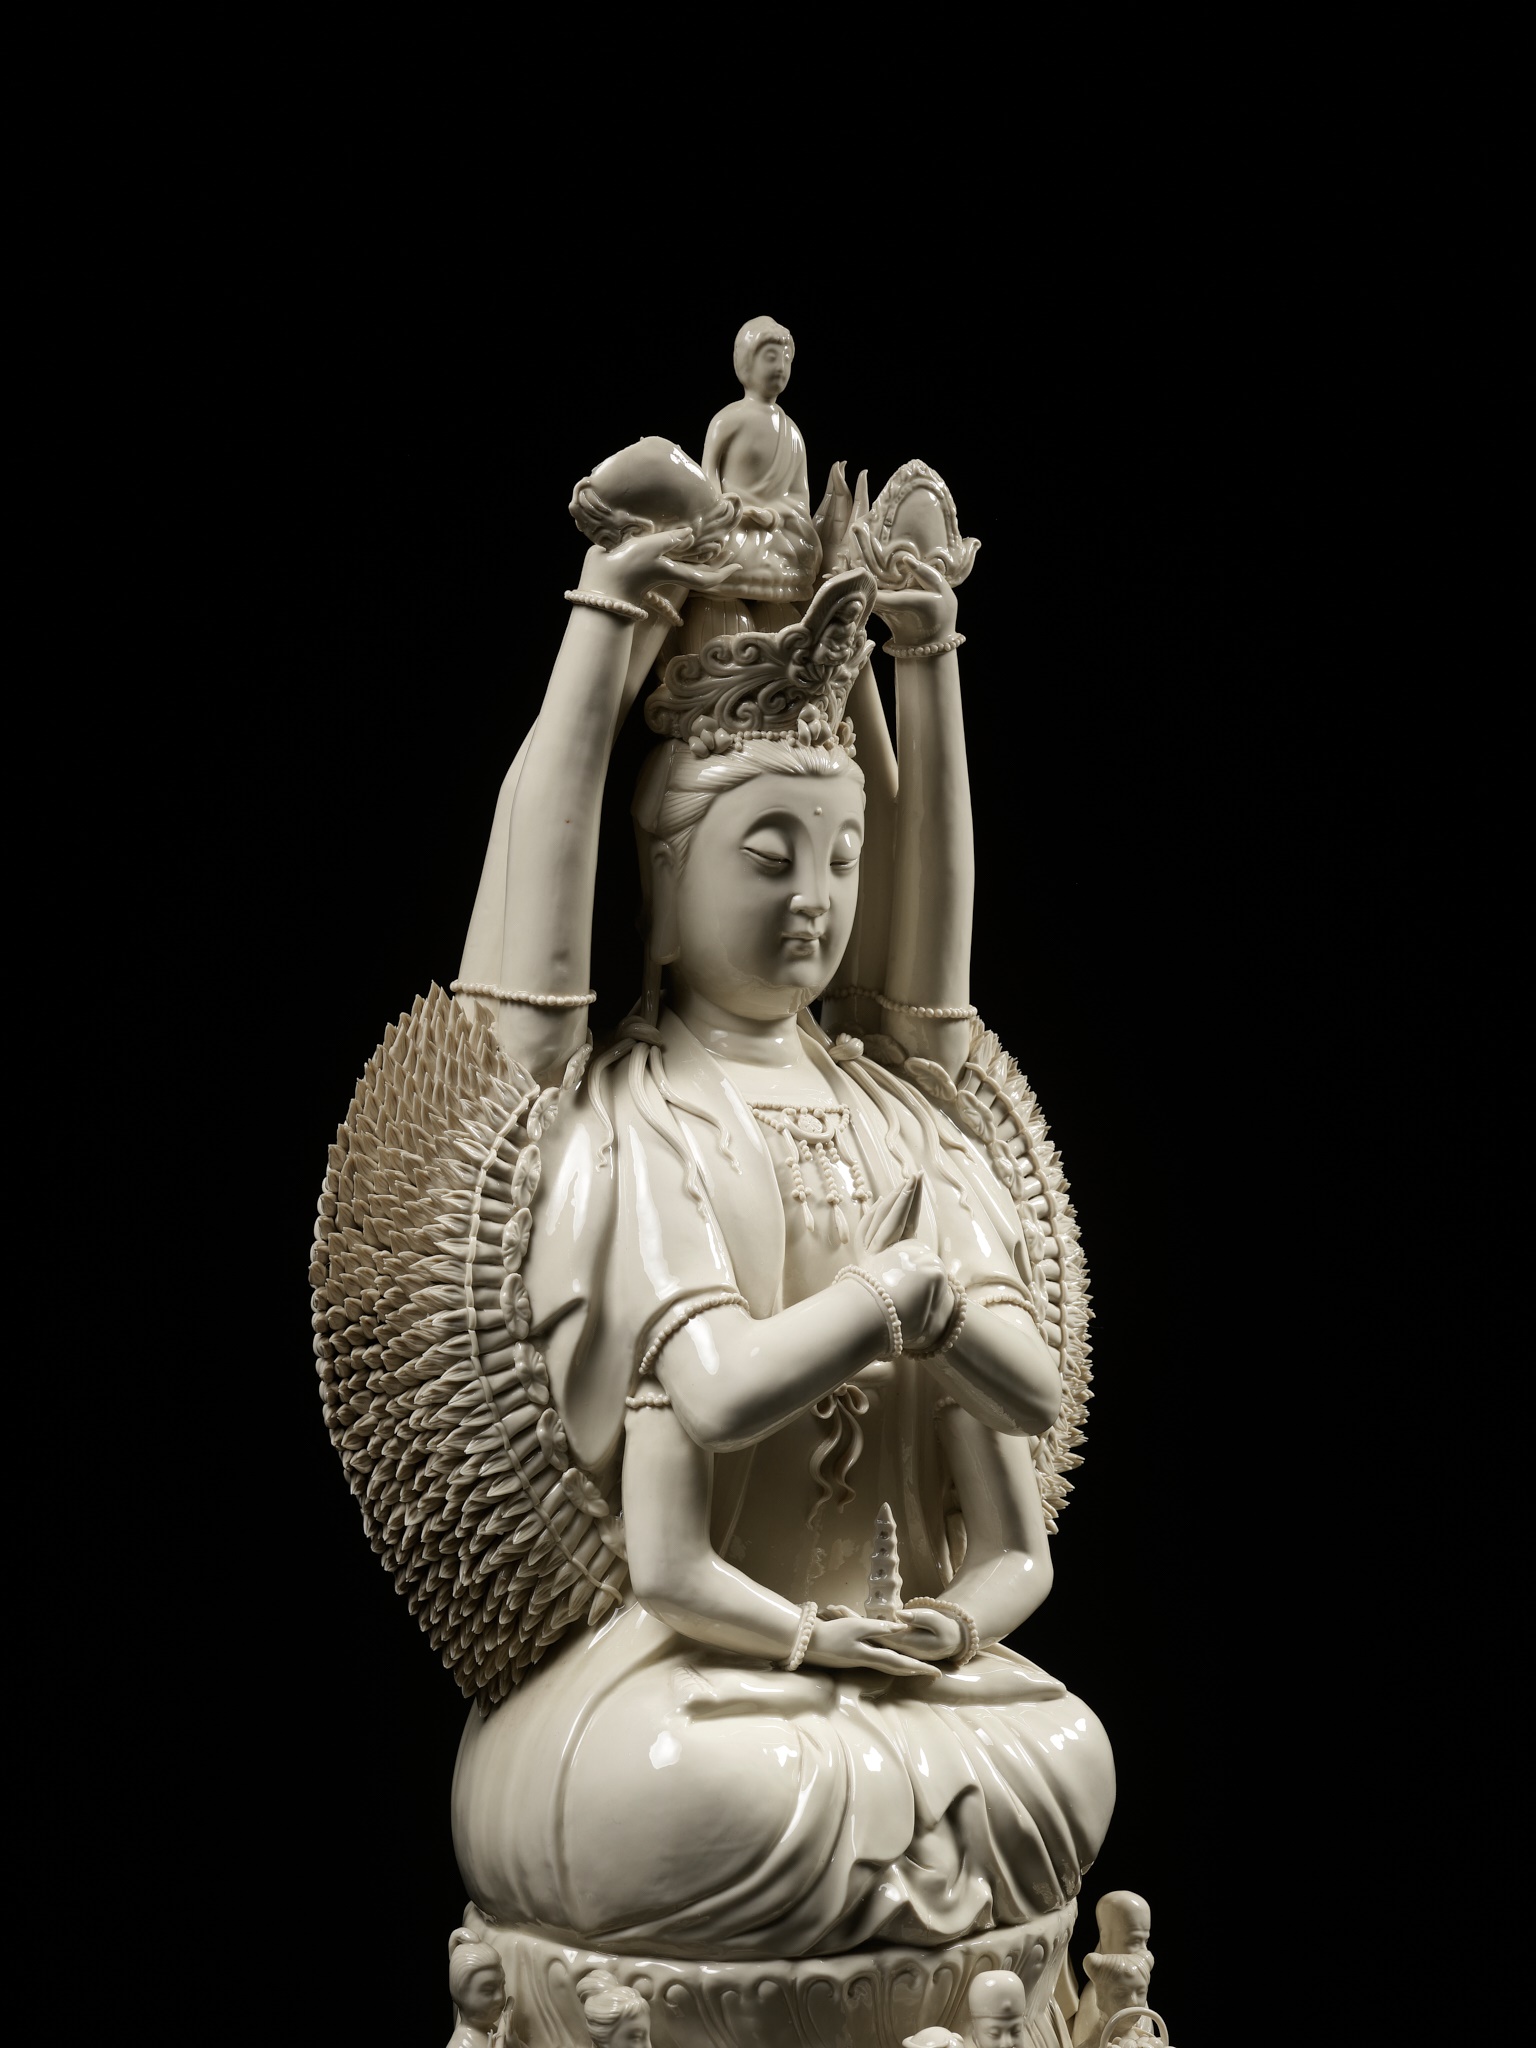 A LARGE DEHUA FIGURE OF THE THOUSAND-ARMED GUANYIN AND THE EIGHT IMMORTALS, LATE QING DYNASTY - Image 21 of 22